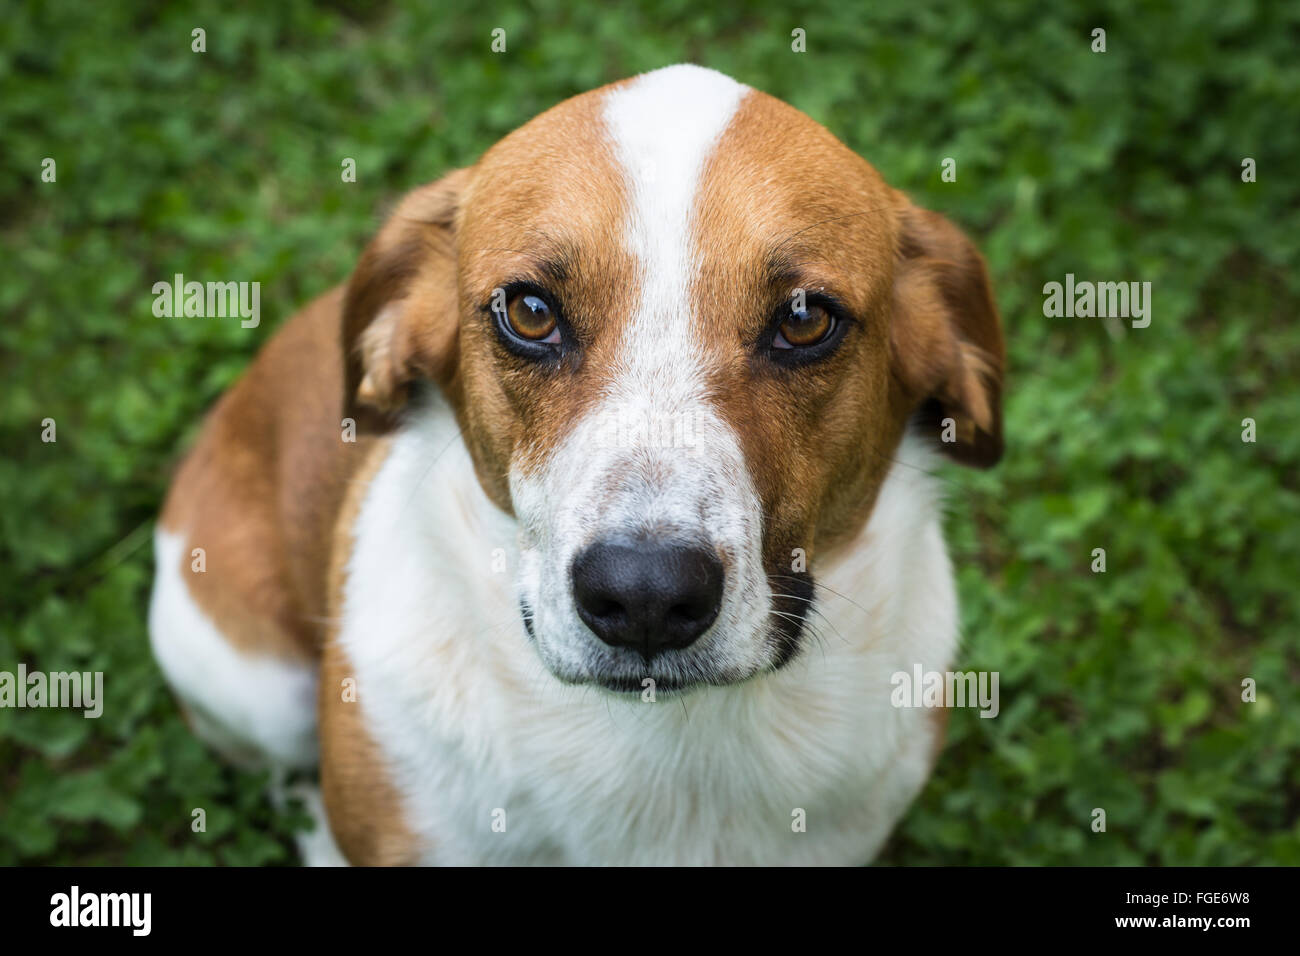 Brown and white dog looks into camera over clover lawn Stock Photo